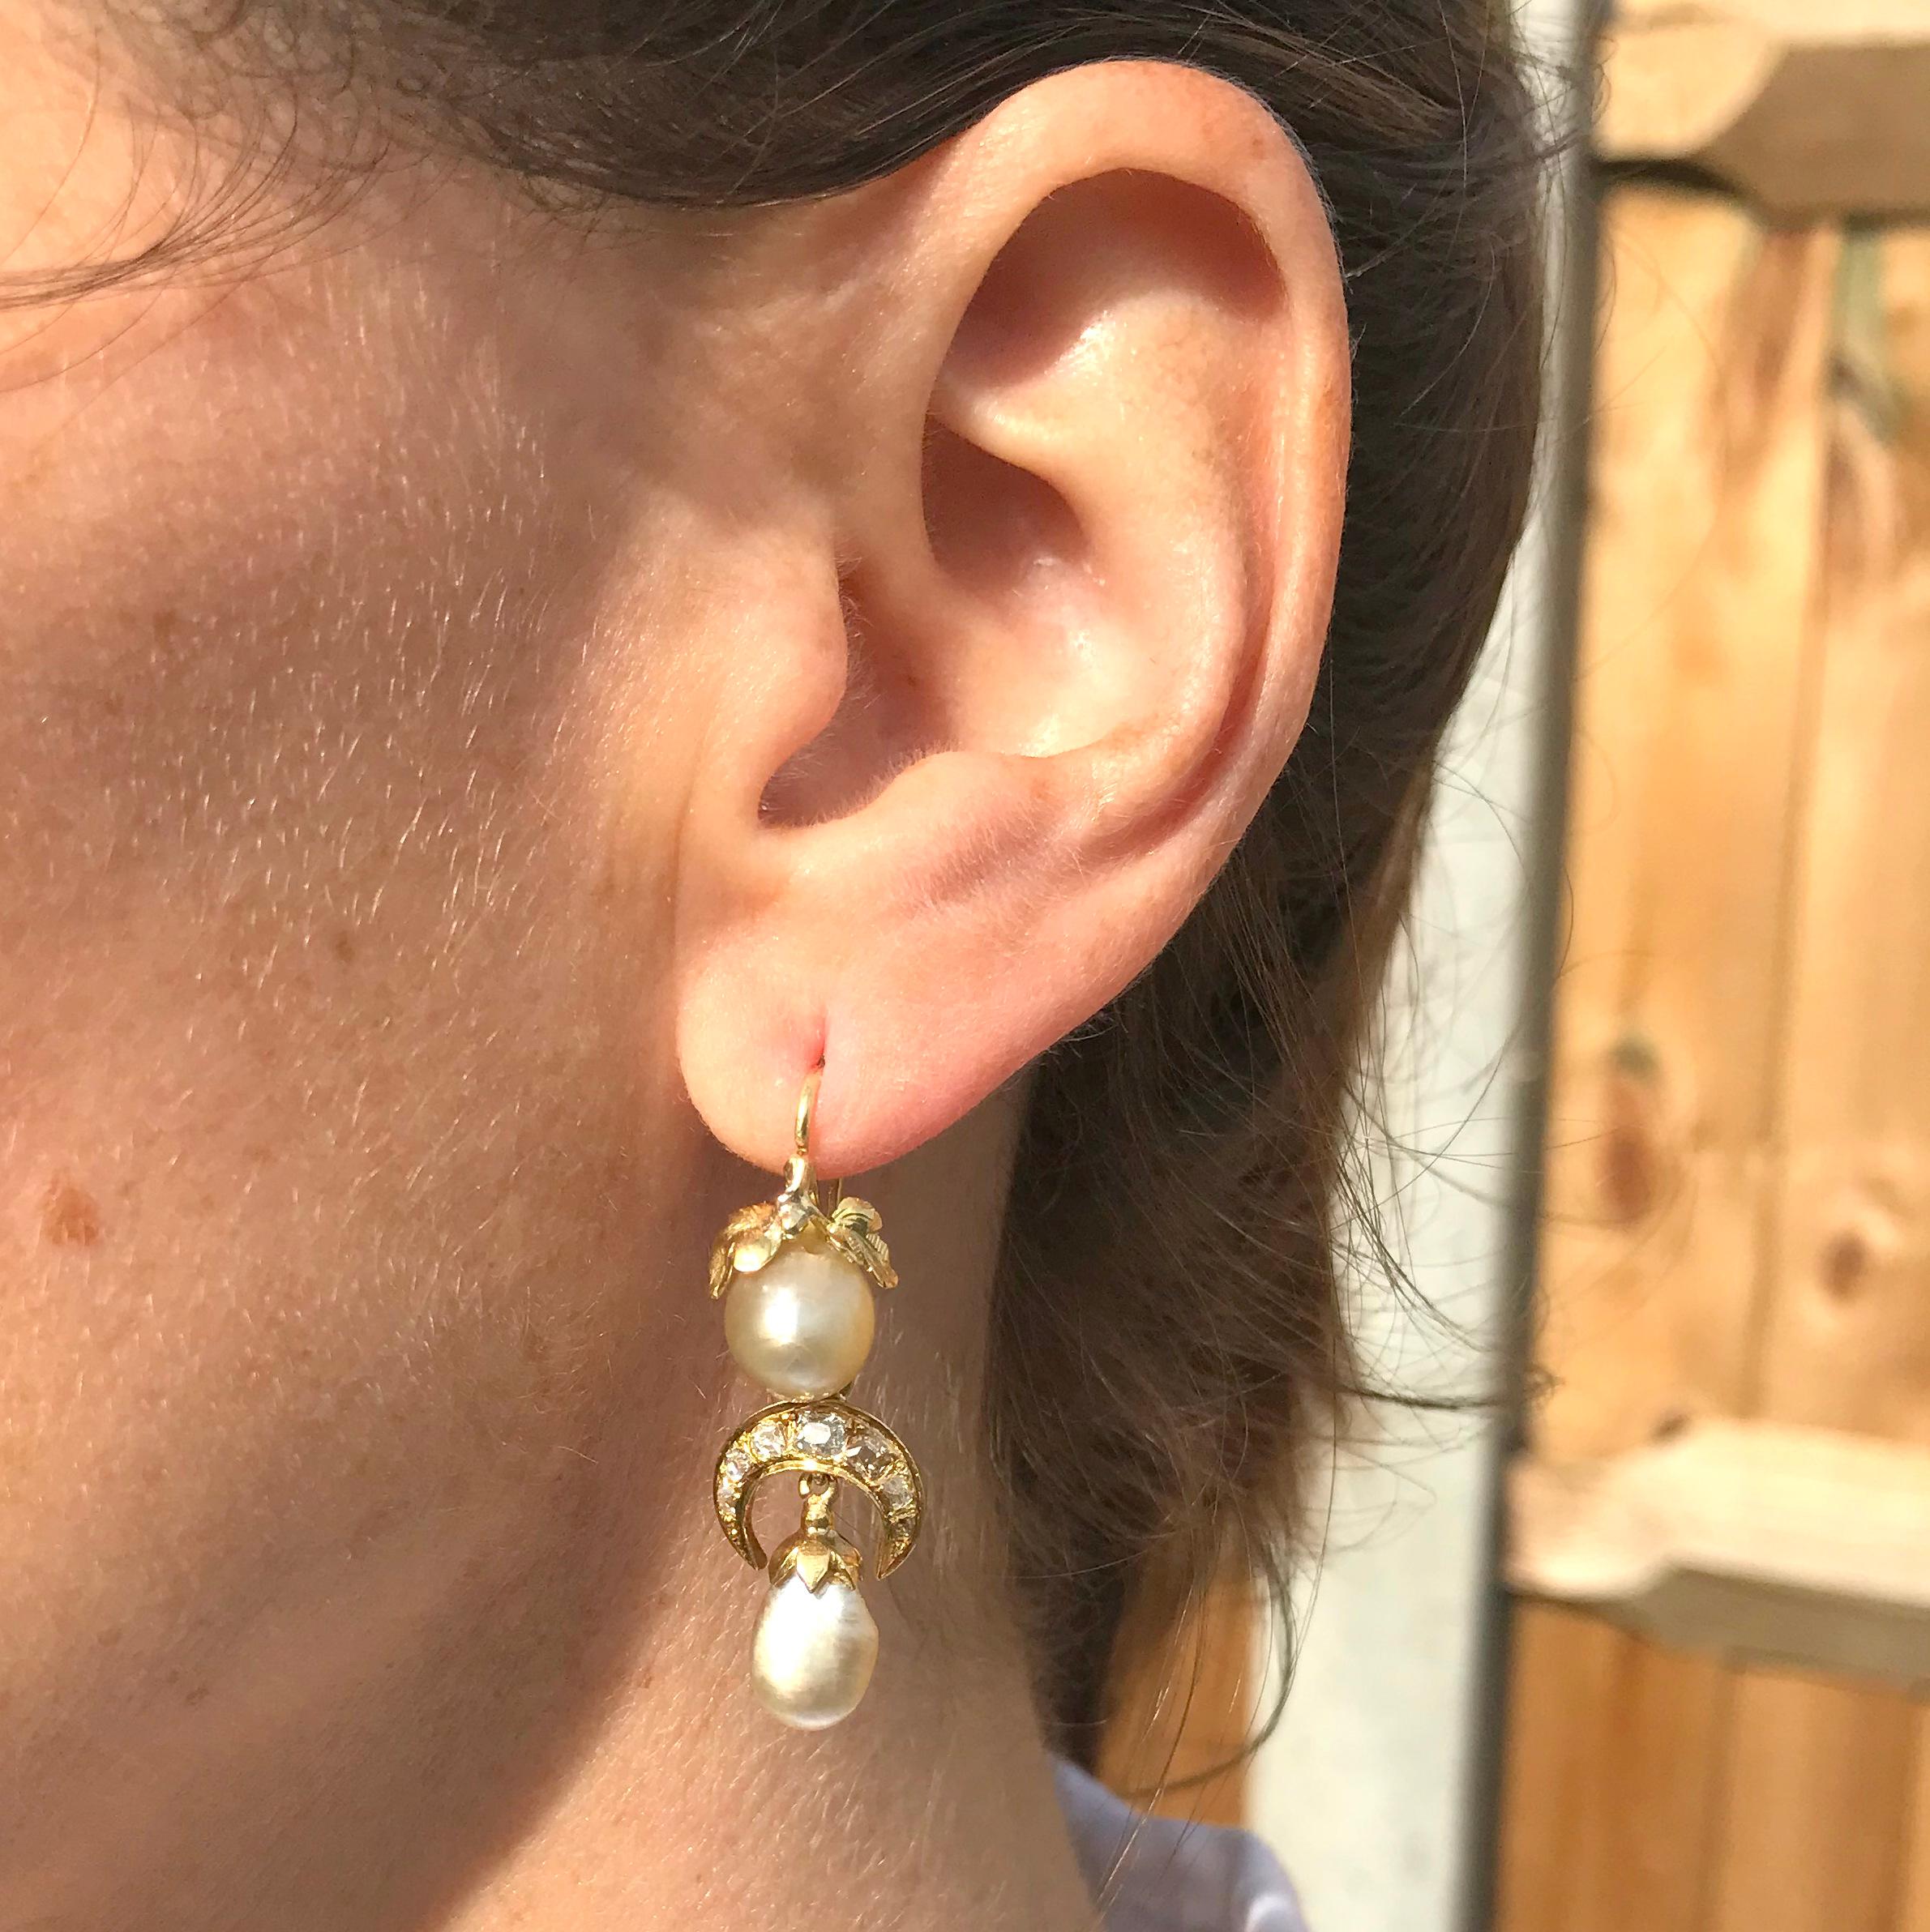 Breathtaking natural pearl earrings which can be worn long with the diamond and pearl drops, or just as the tops alone. Each earring is adorned at the top with a pair of beautifully realised leaves, with the articulated bottom part of the earrings